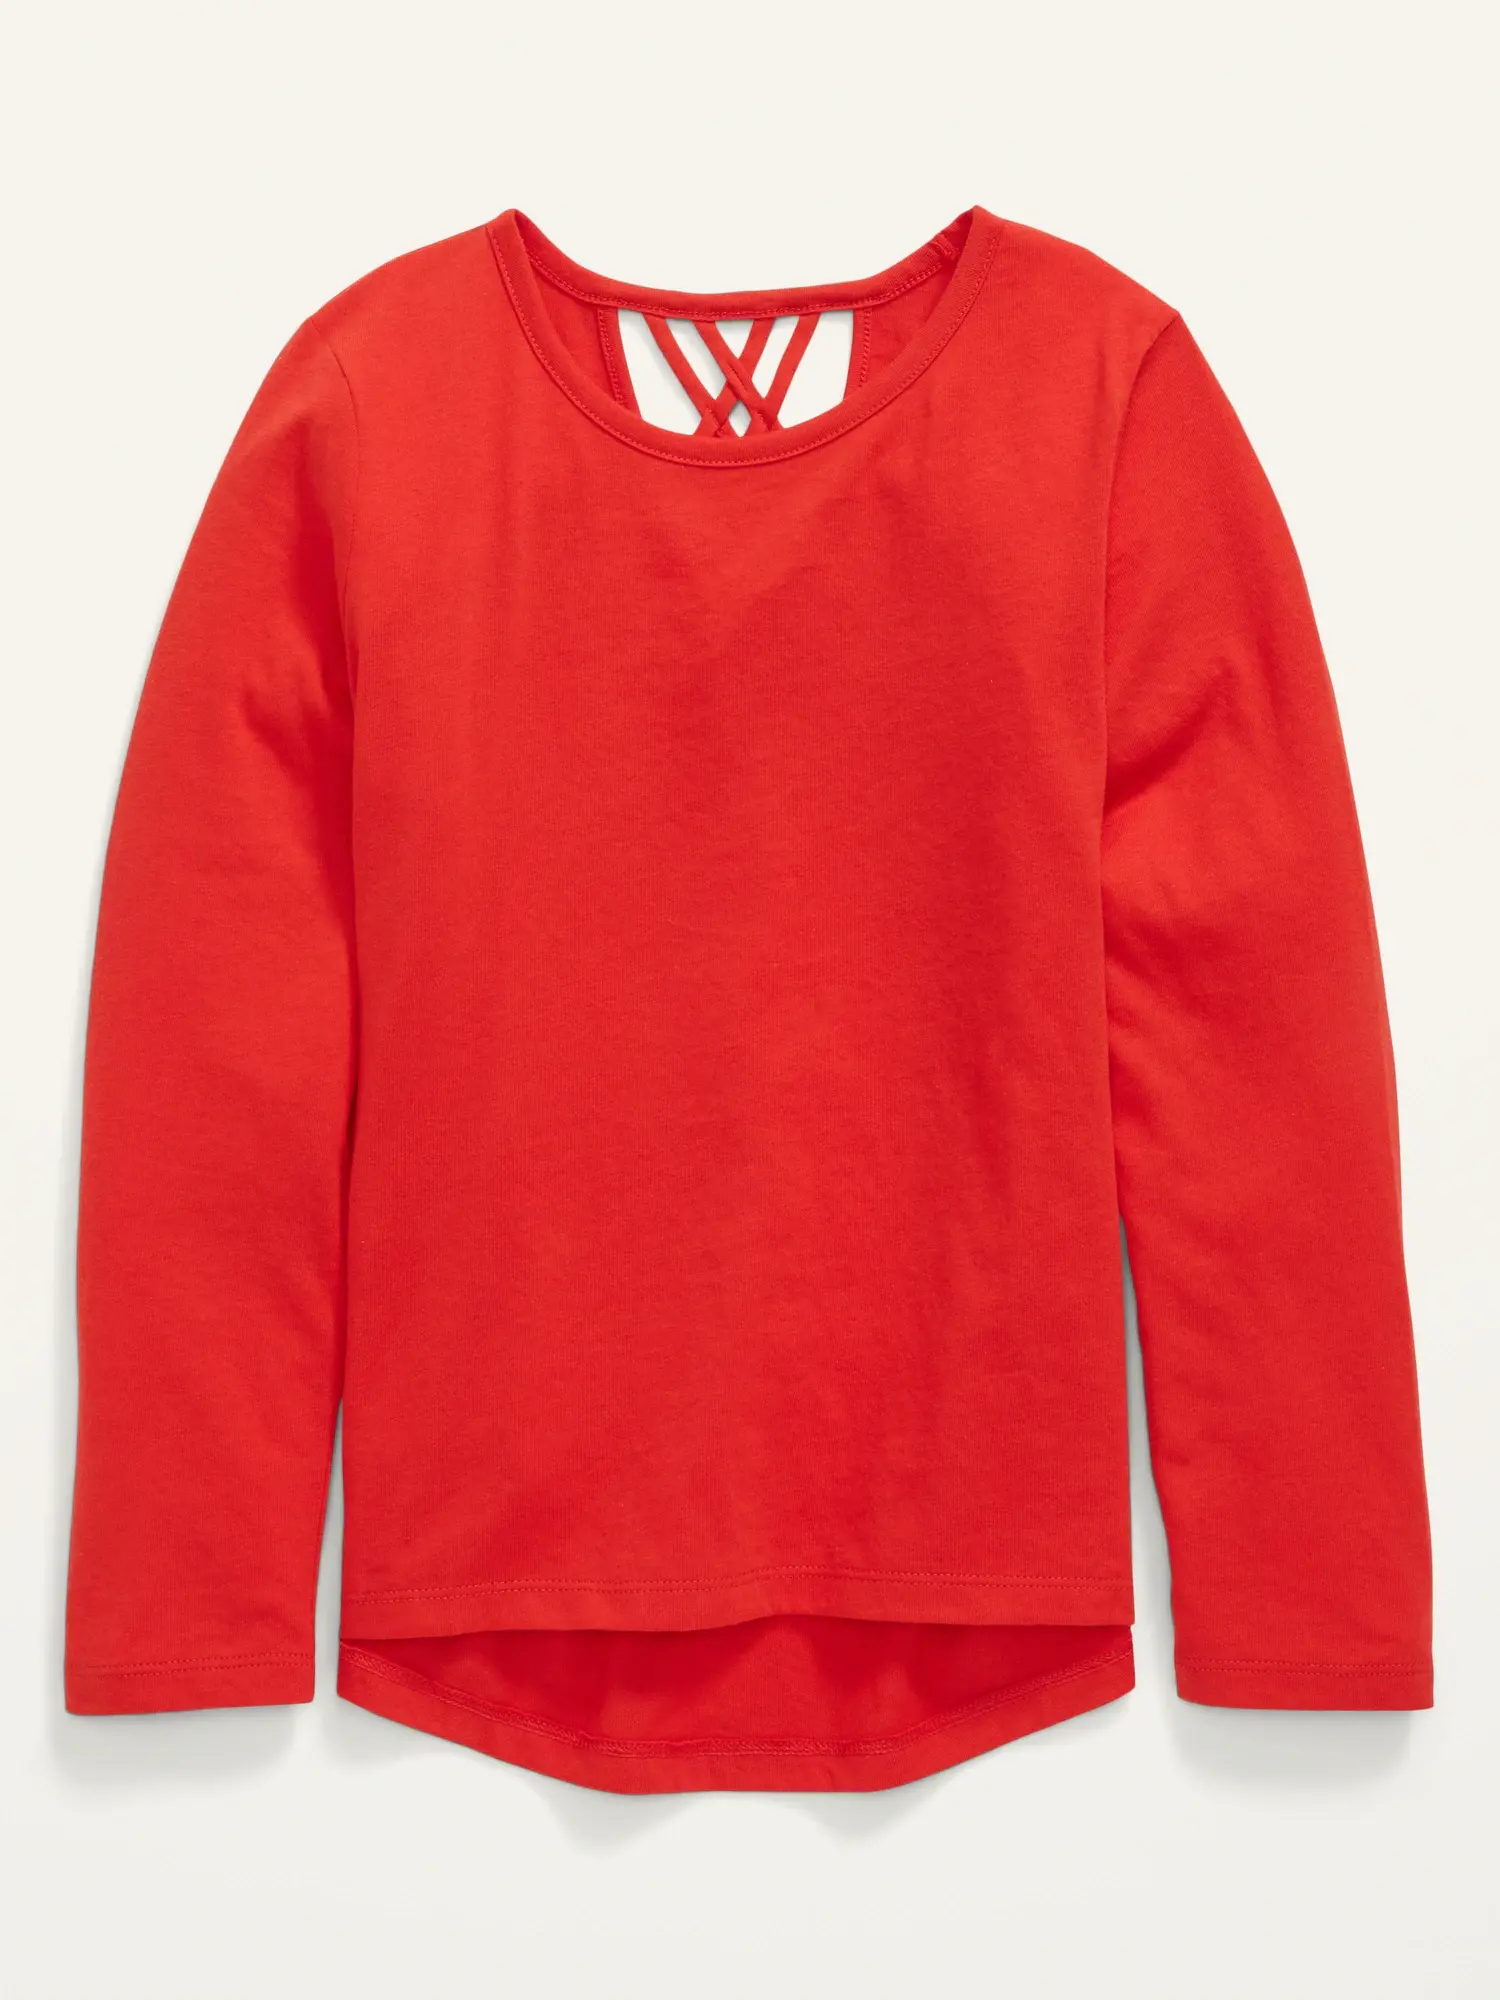 Old Navy Softest Long-Sleeve Lattice-Back Tee for Girls red. 1